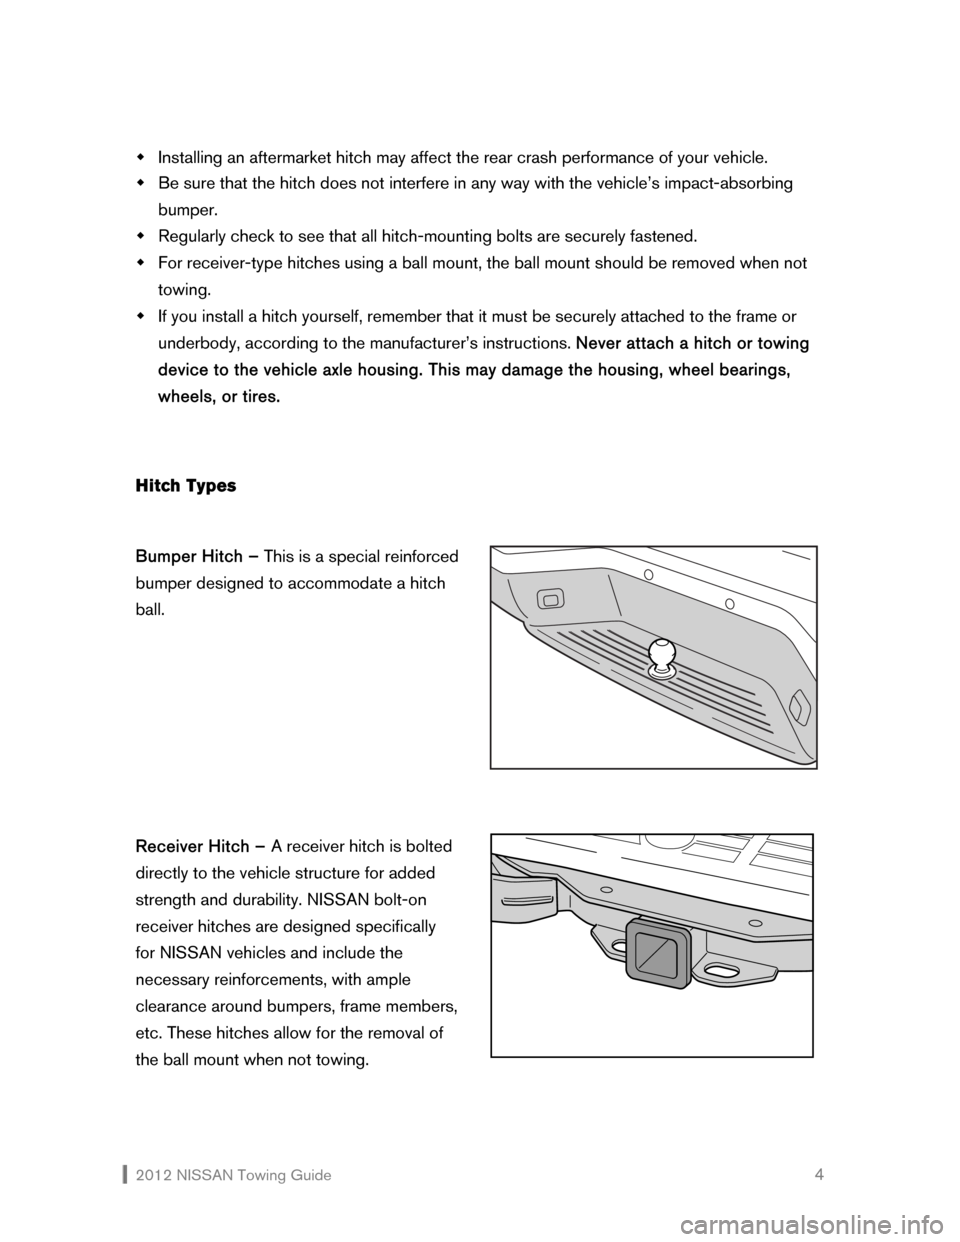 NISSAN 370Z ROADSTER 2012 Z34 Towing Guide  2012 NISSAN Towing Guide    4 �Š Installing an aftermarket hitch may affect the rear crash performance of your vehicle. 
�Š Be sure that the hitch does not interfere in any way with the vehicle’s